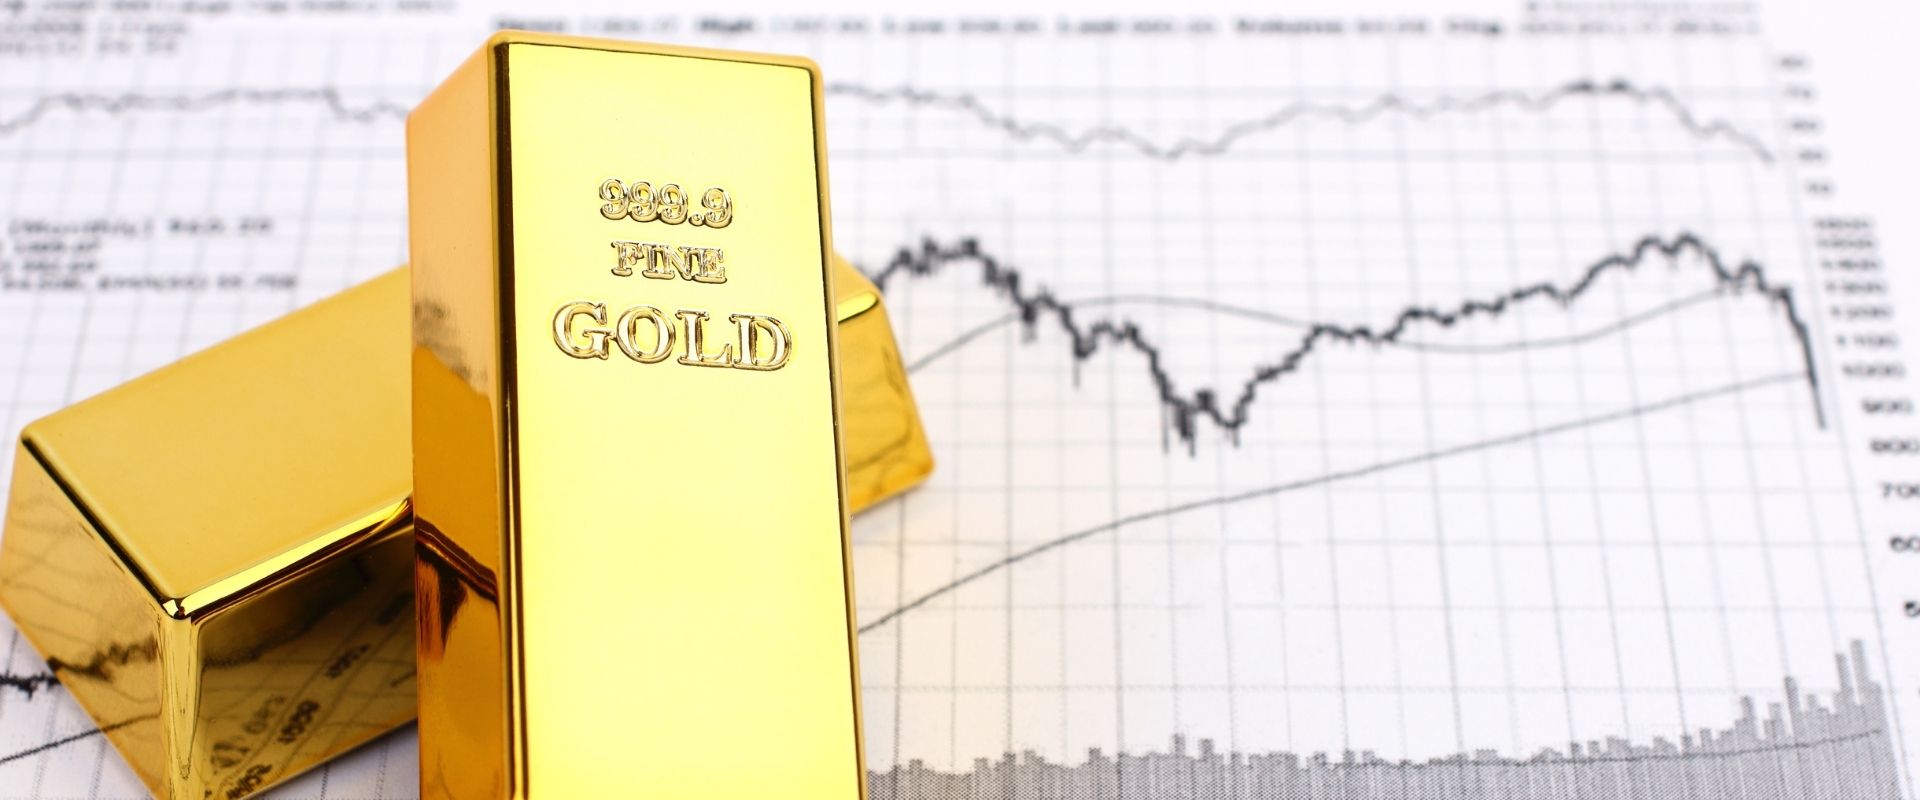 two fine gold bars on gold futures price chart